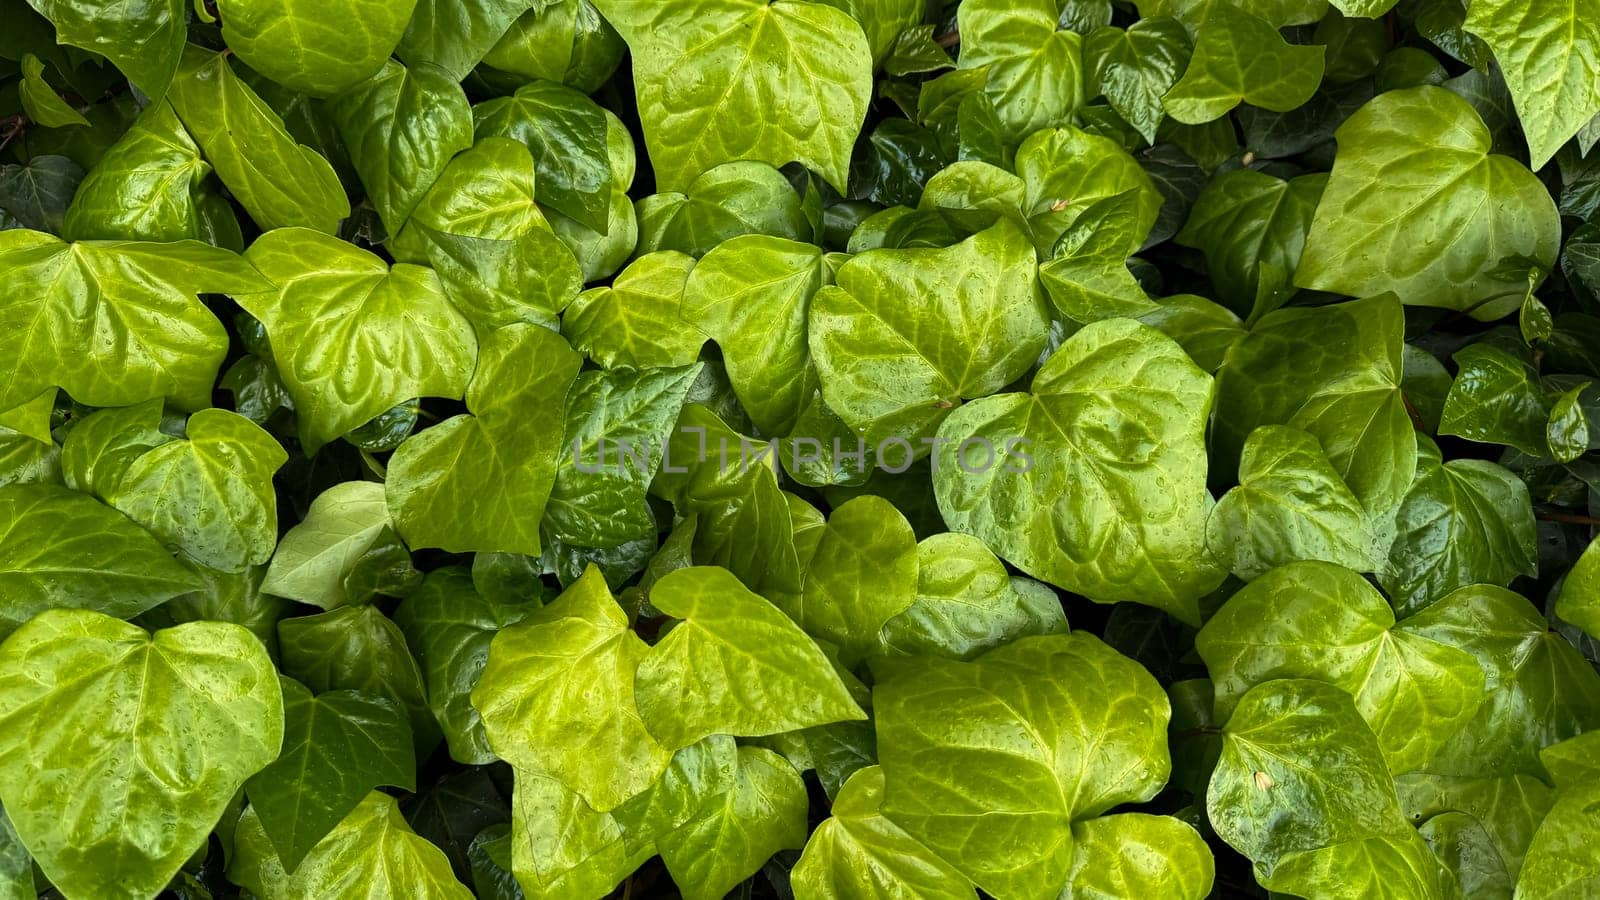 Nature background. Lush green ivy leaves with water droplets, dense leafy ground cover, freshness concept for garden design, poster, wallpaper. High quality photo